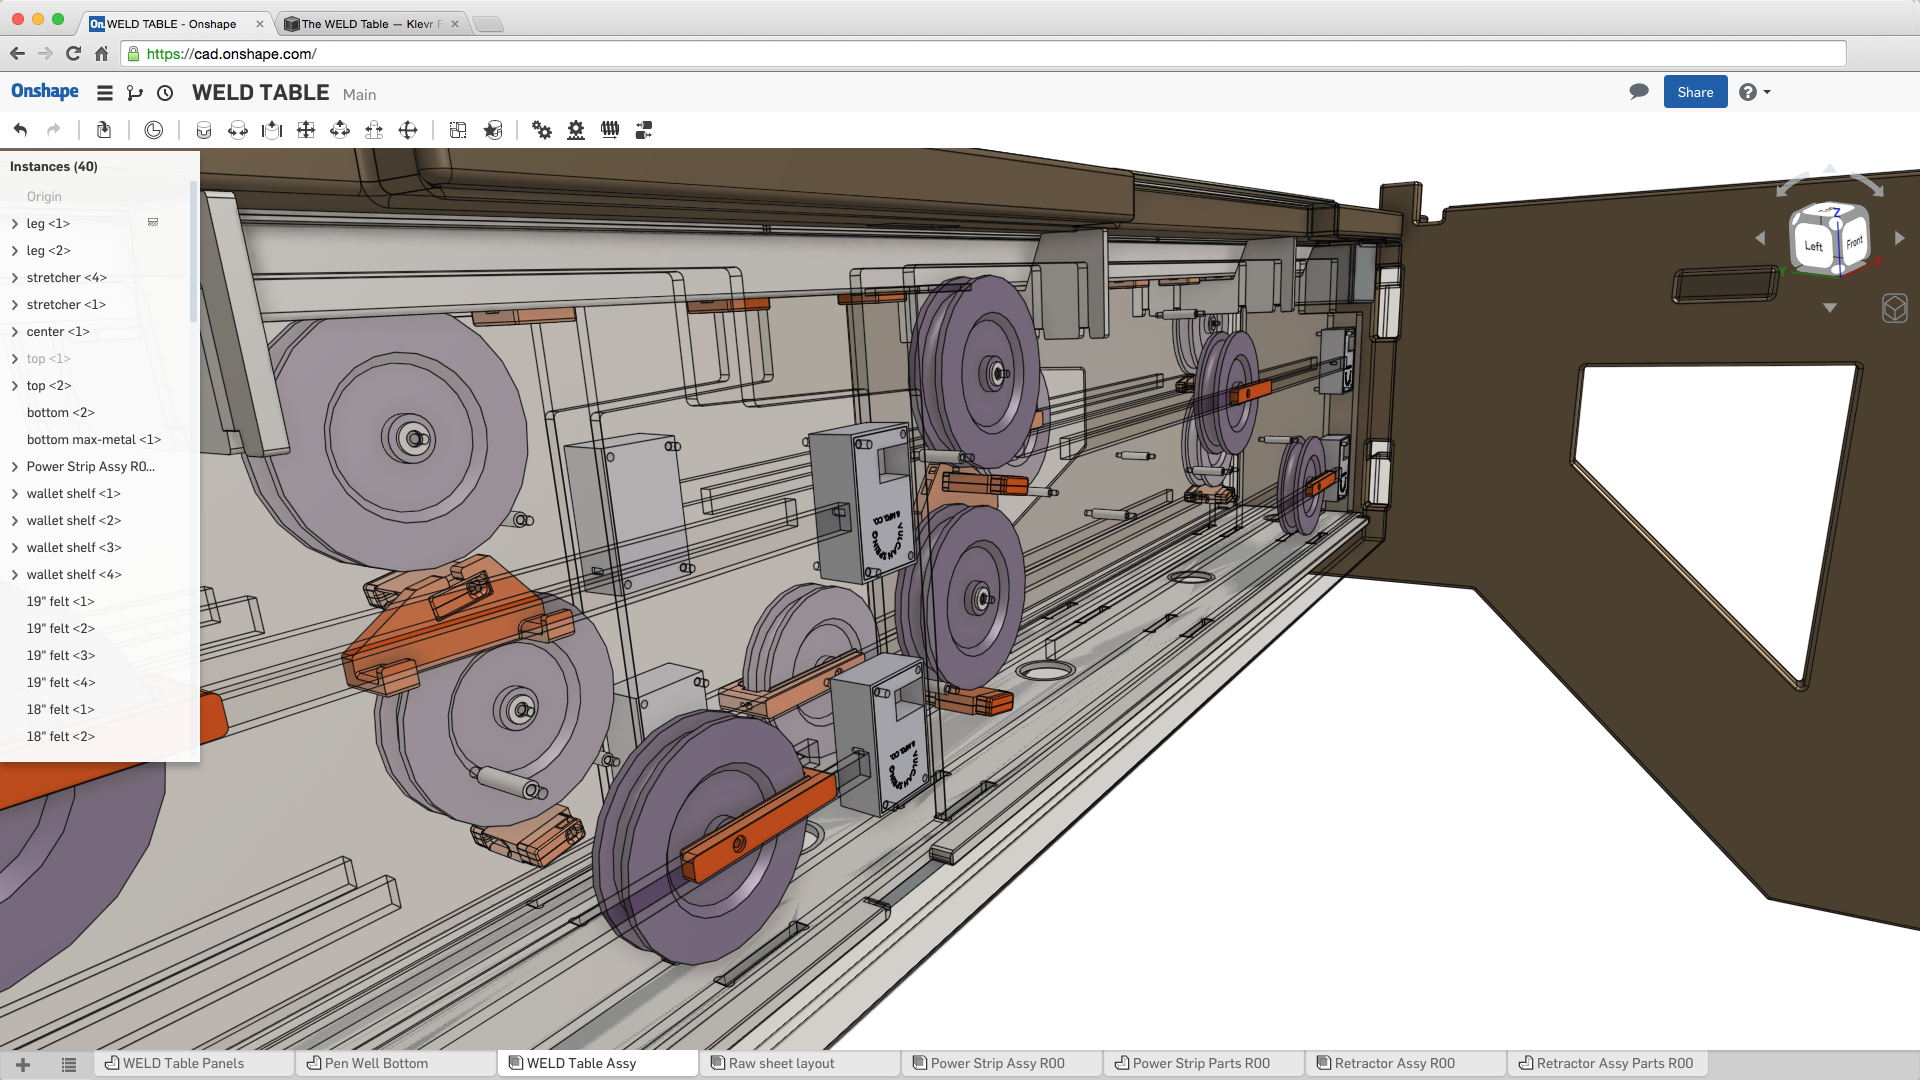 Wireframe view of center of Klevr WELD Table